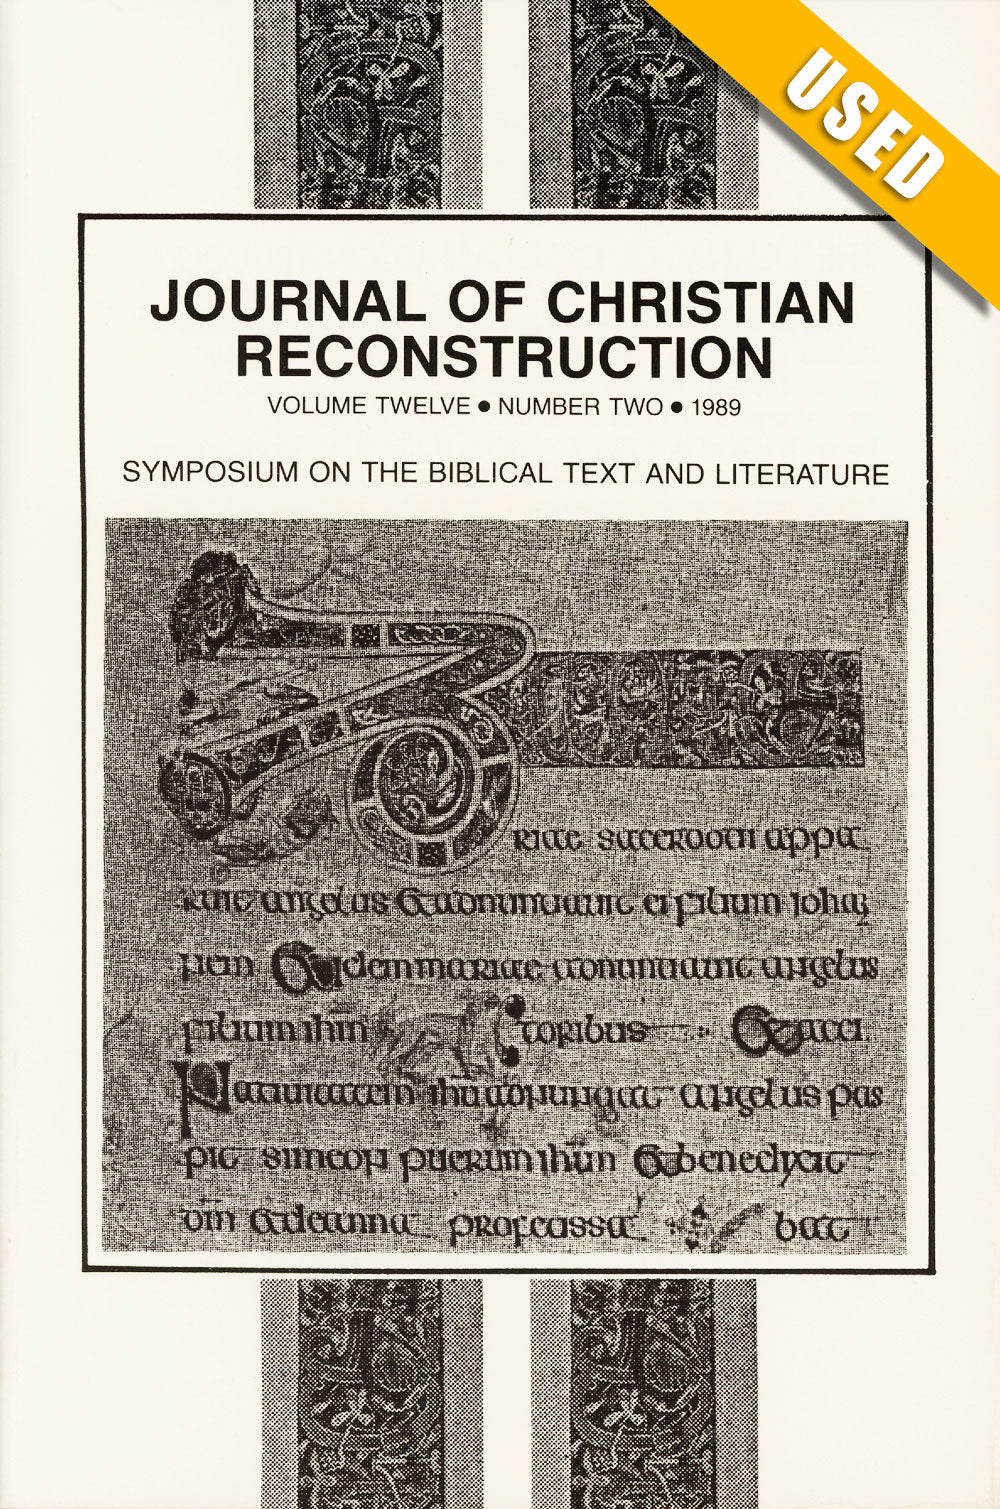 JCR Vol 12 No 2: Symposium on the Biblical Text and Literature